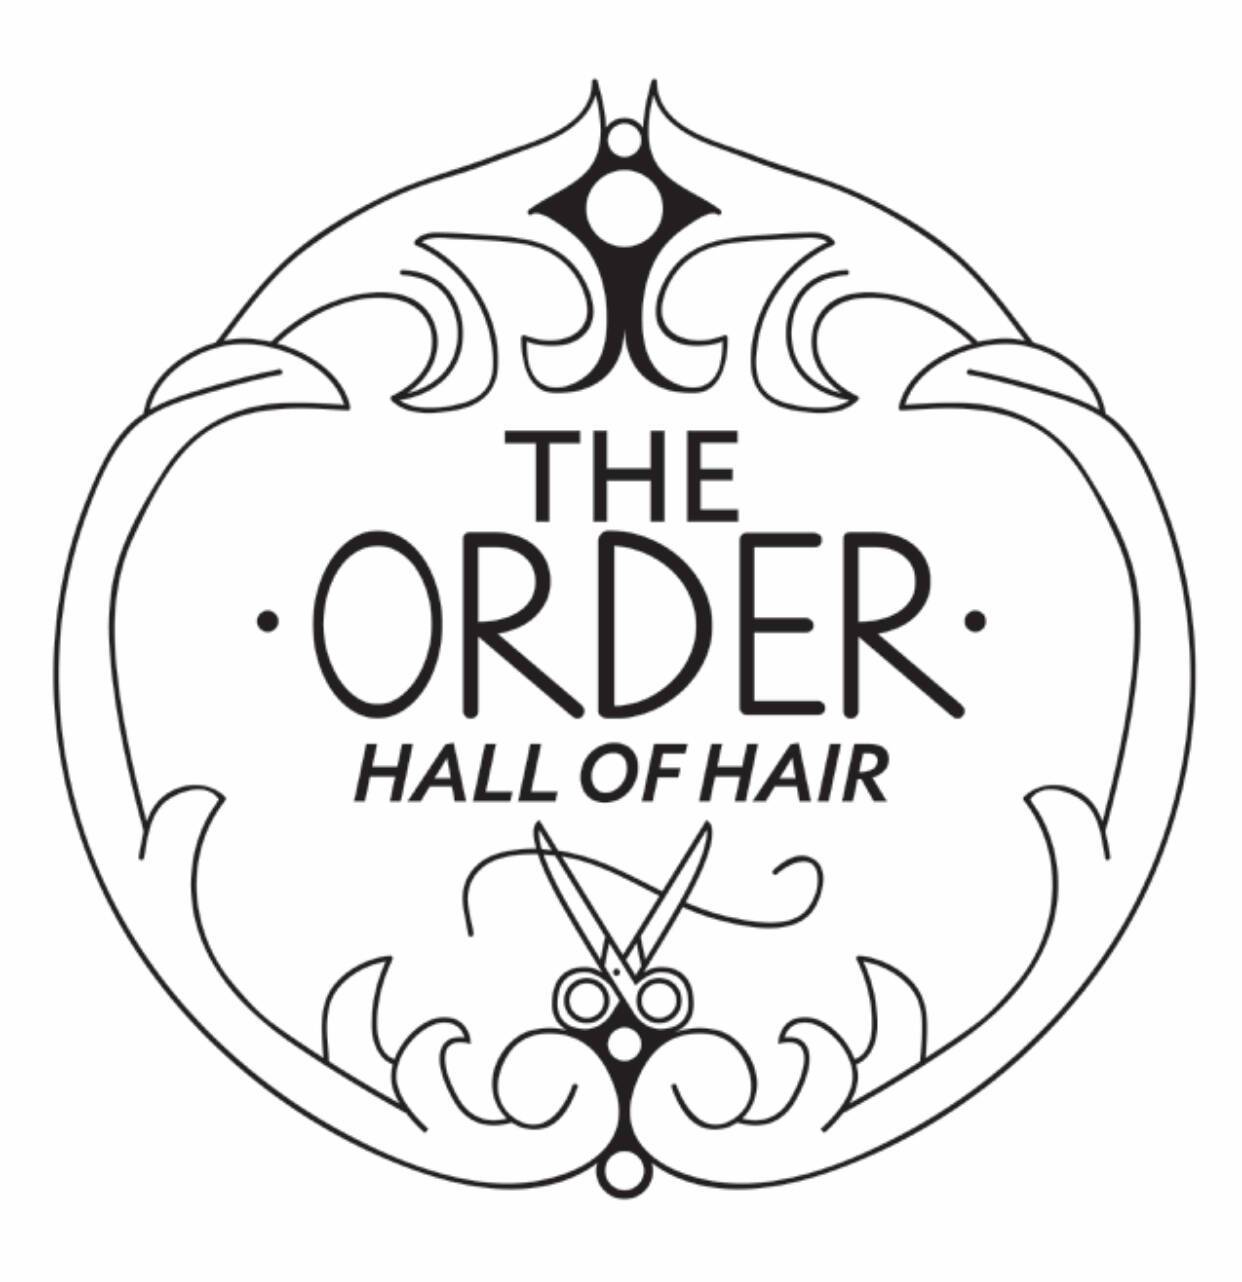 The Order Hall of Hair